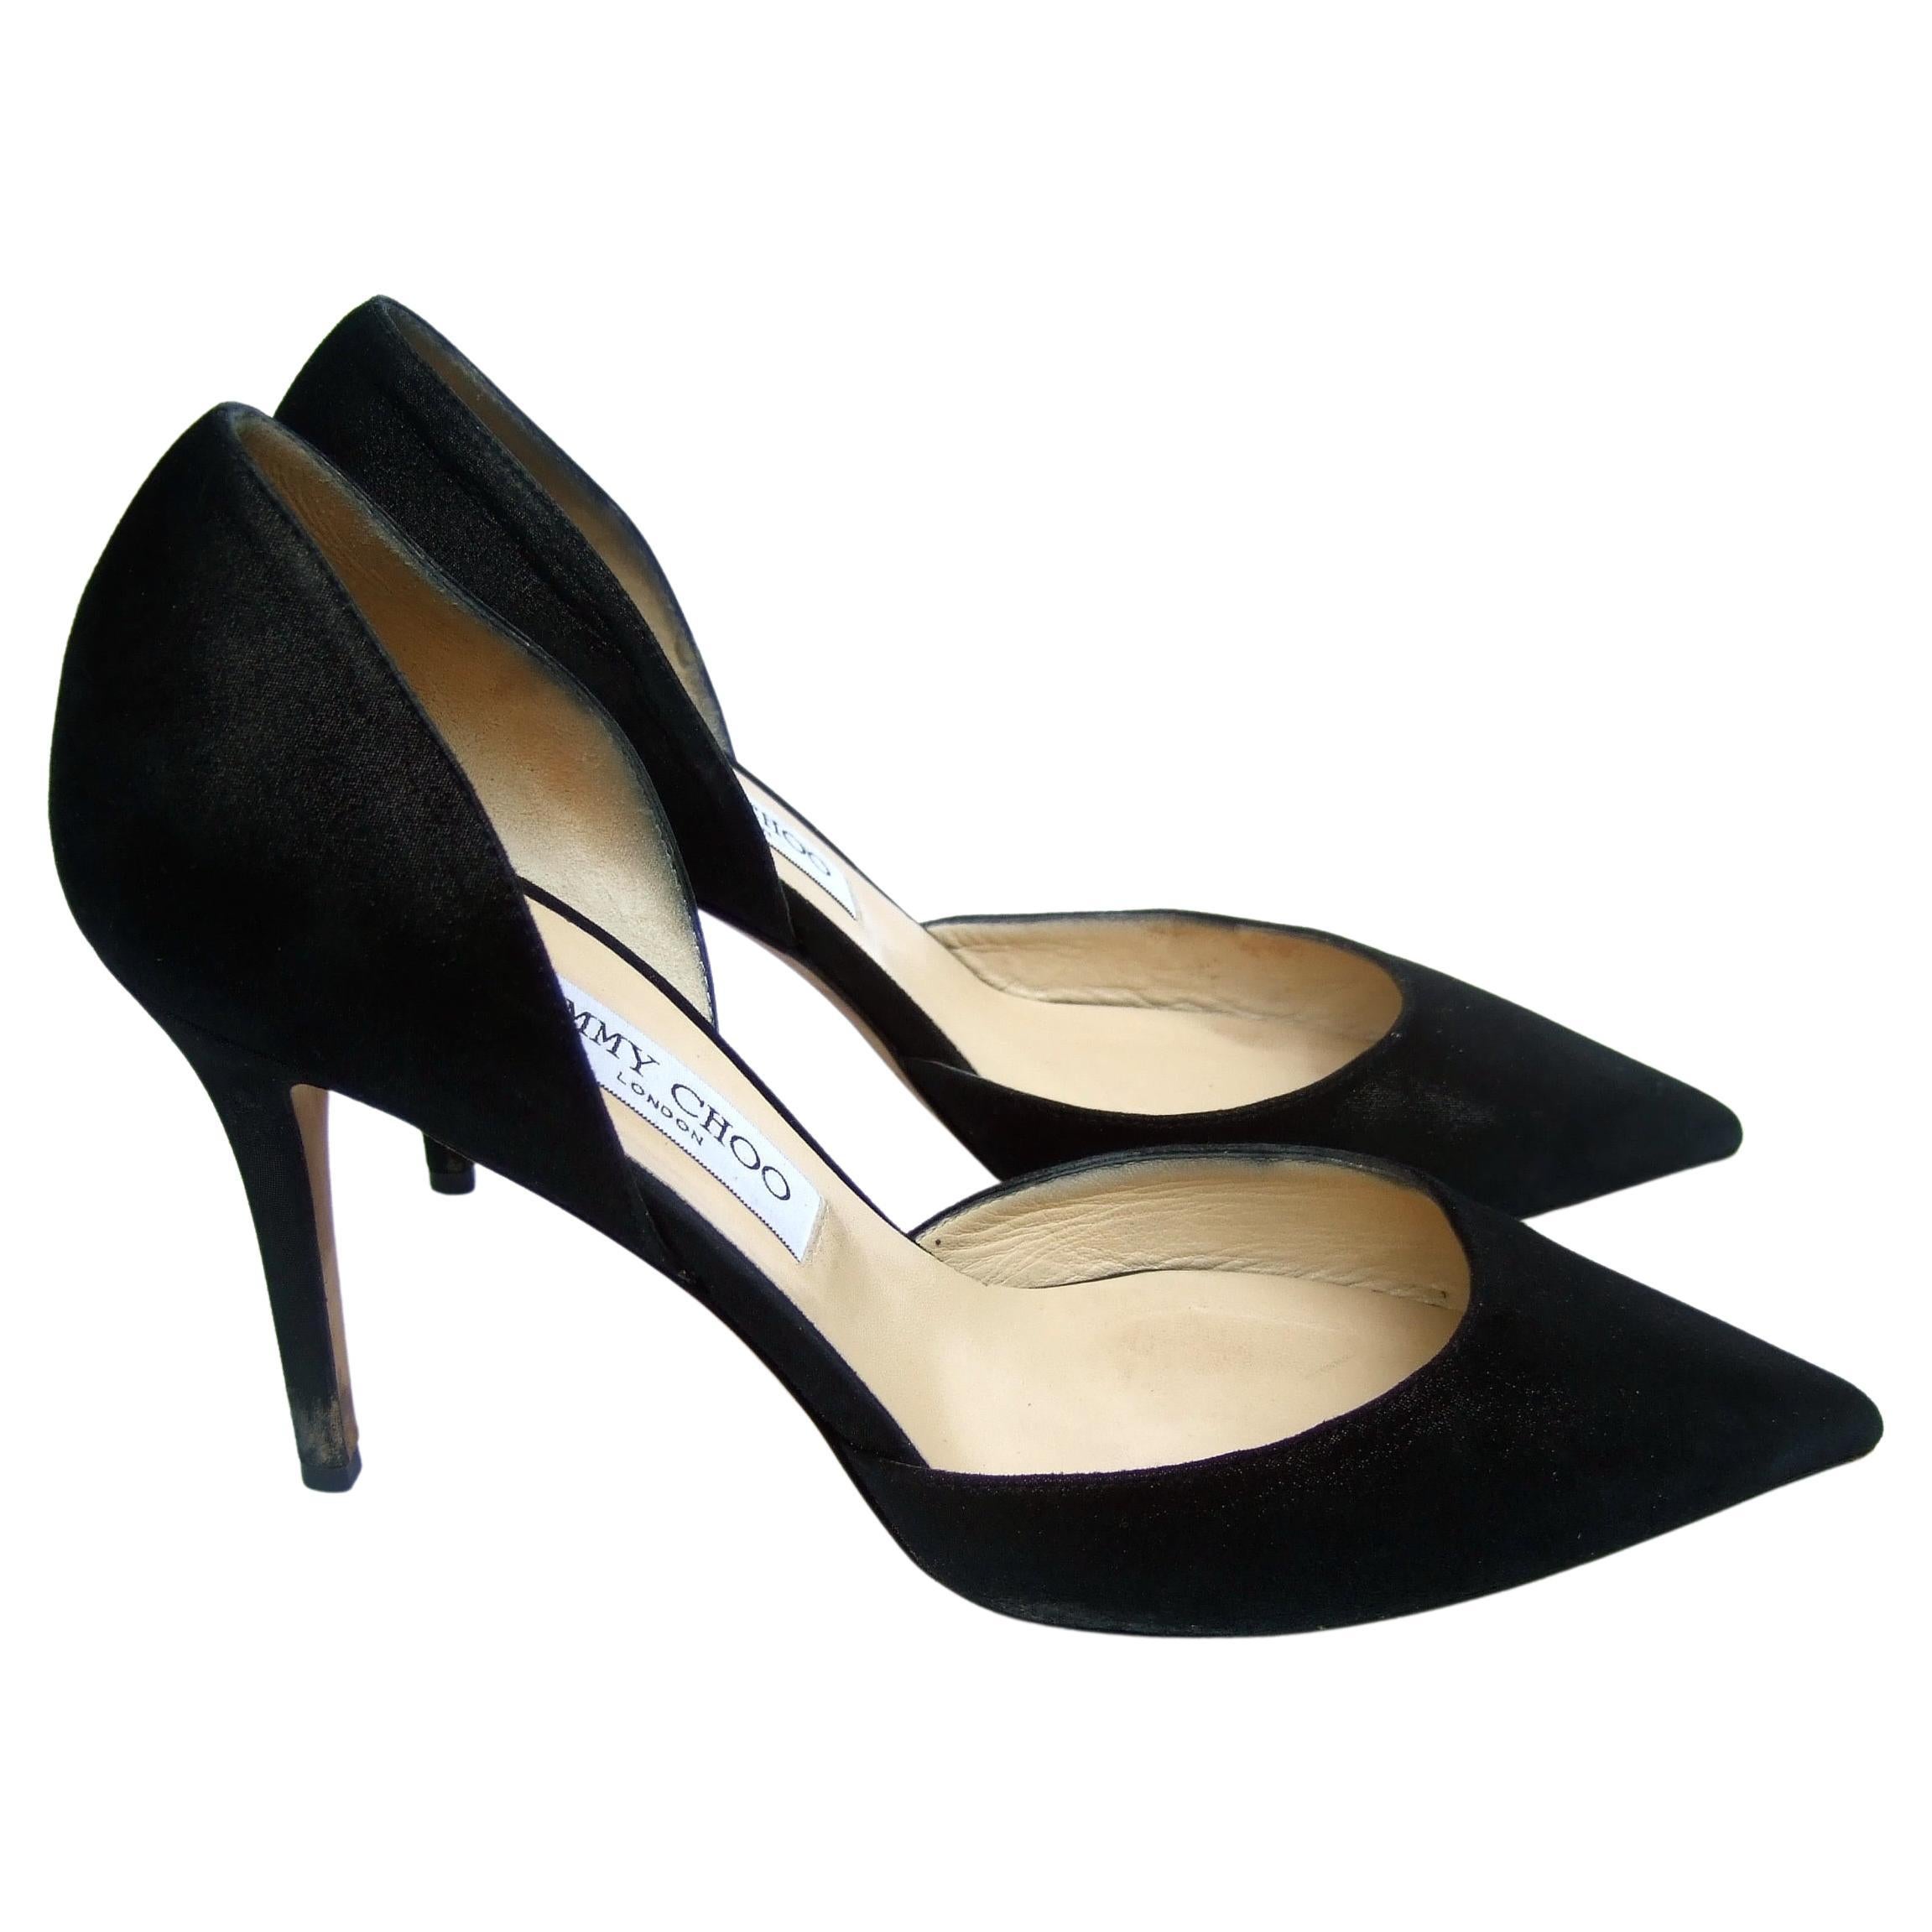 Jimmy Choo London Italian Black Brushed Leather Stiletto Pumps Size 40 c 1990s For Sale